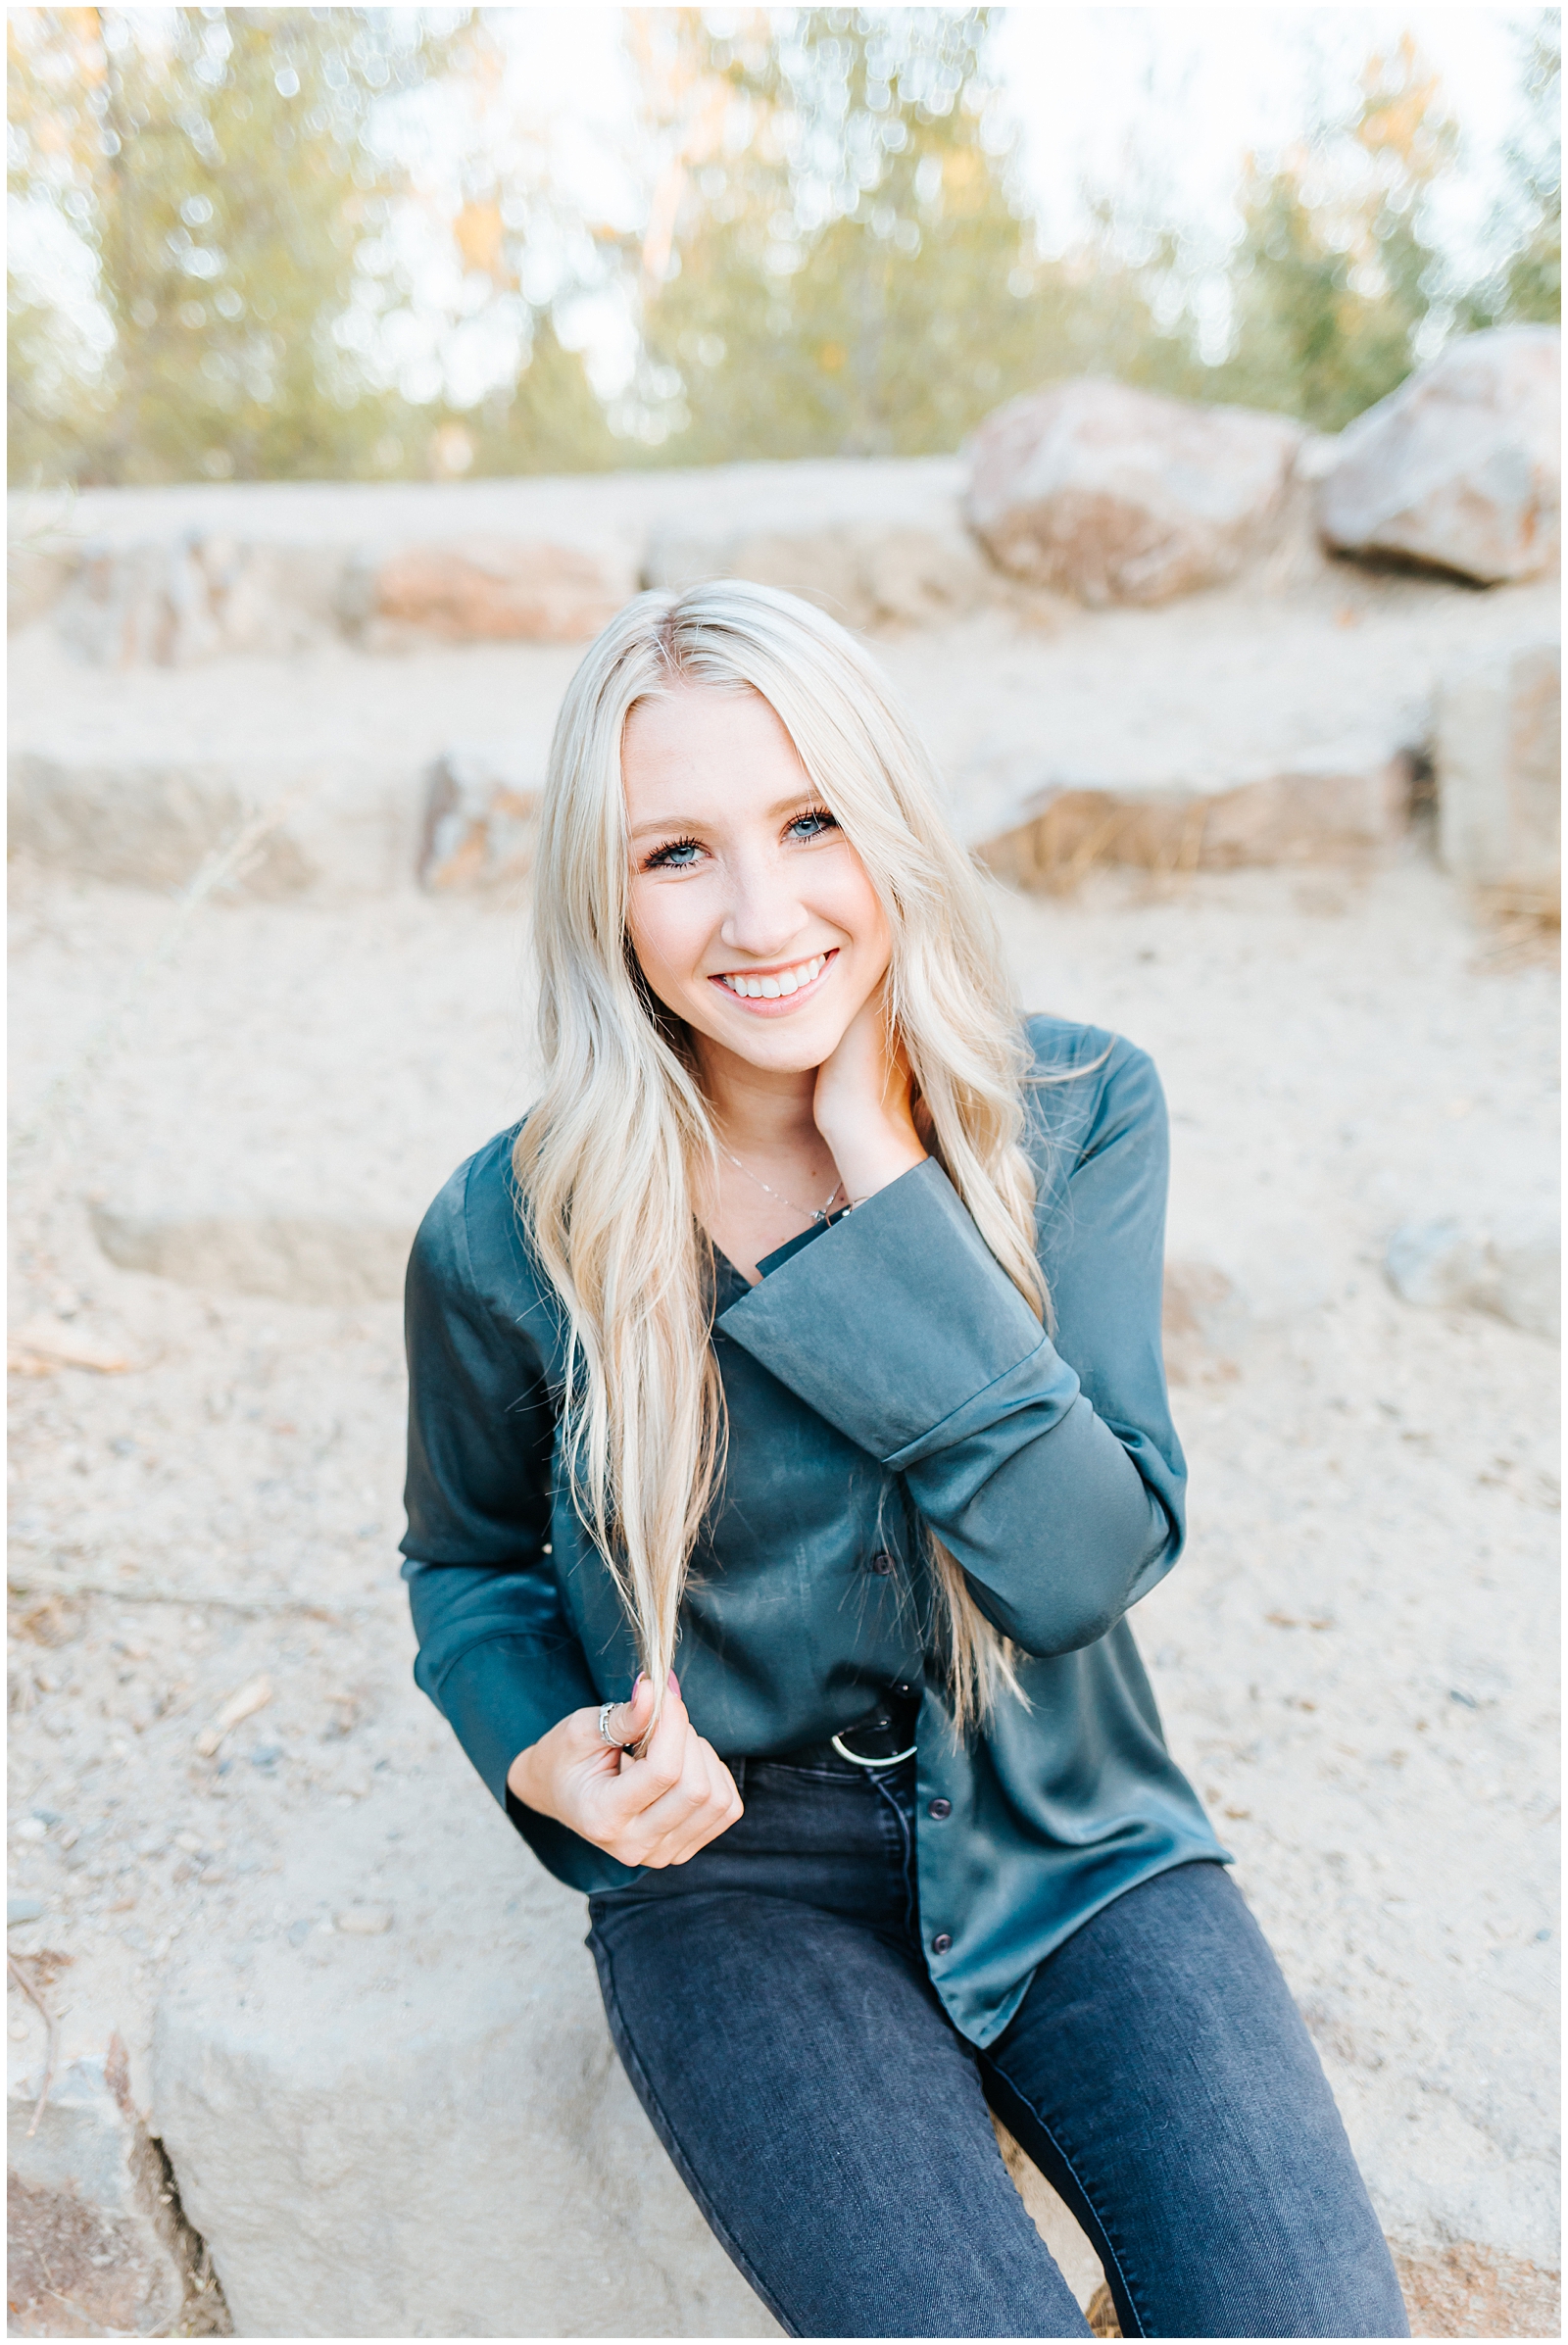 Dreamy Senior Session by the Boise River in Green Silk Shirt